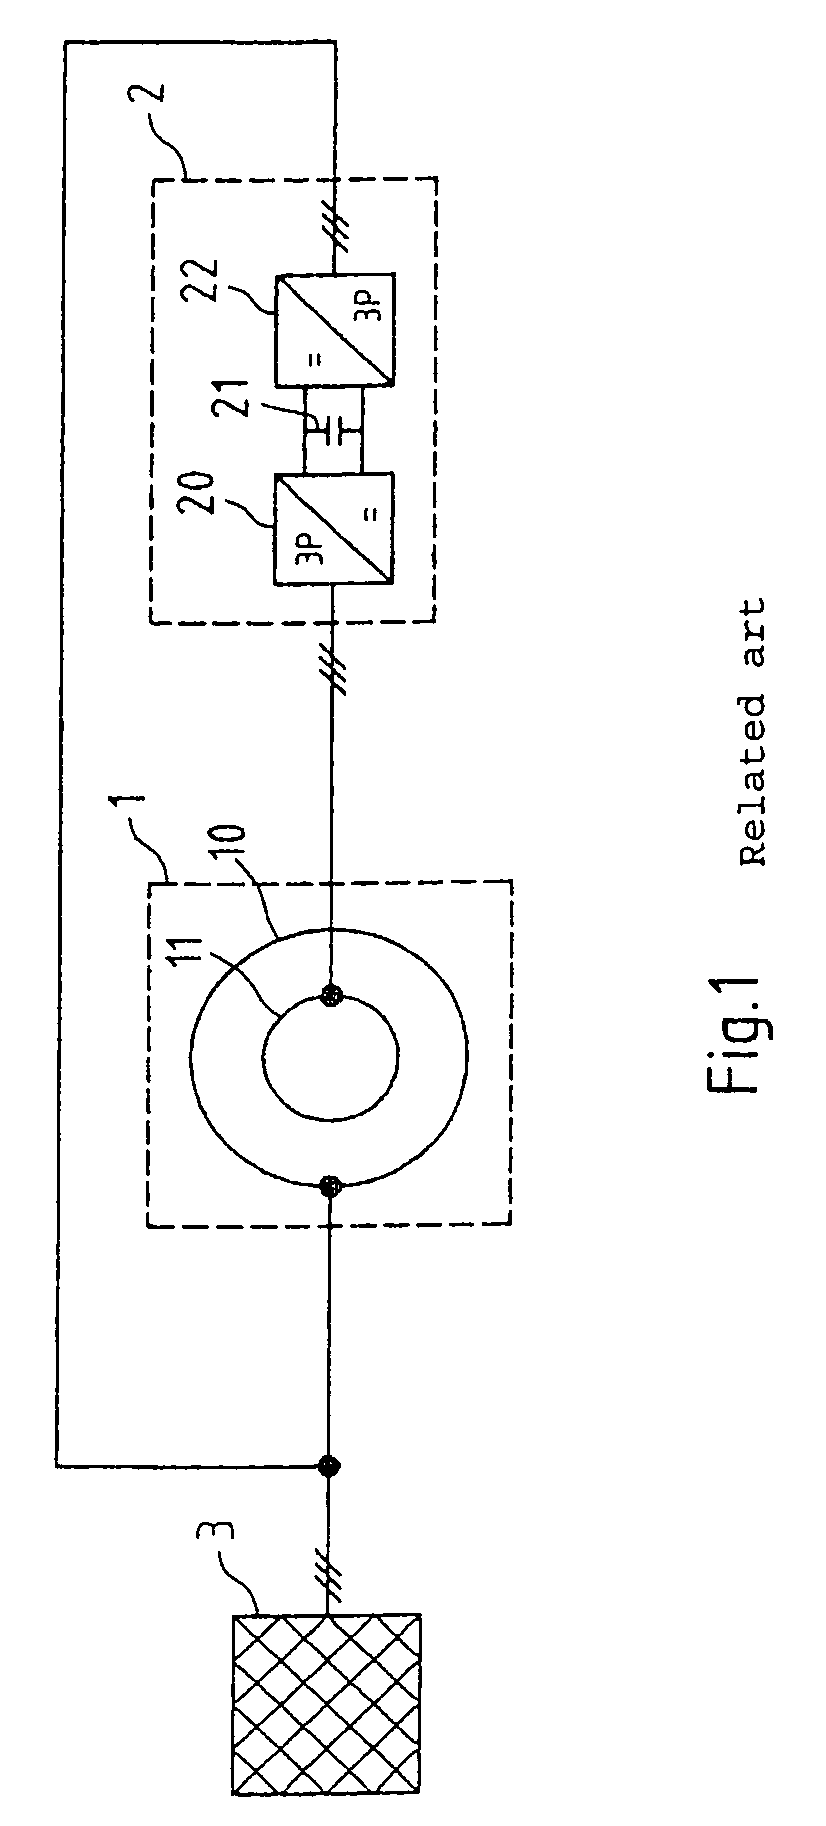 Power control of an induction machine